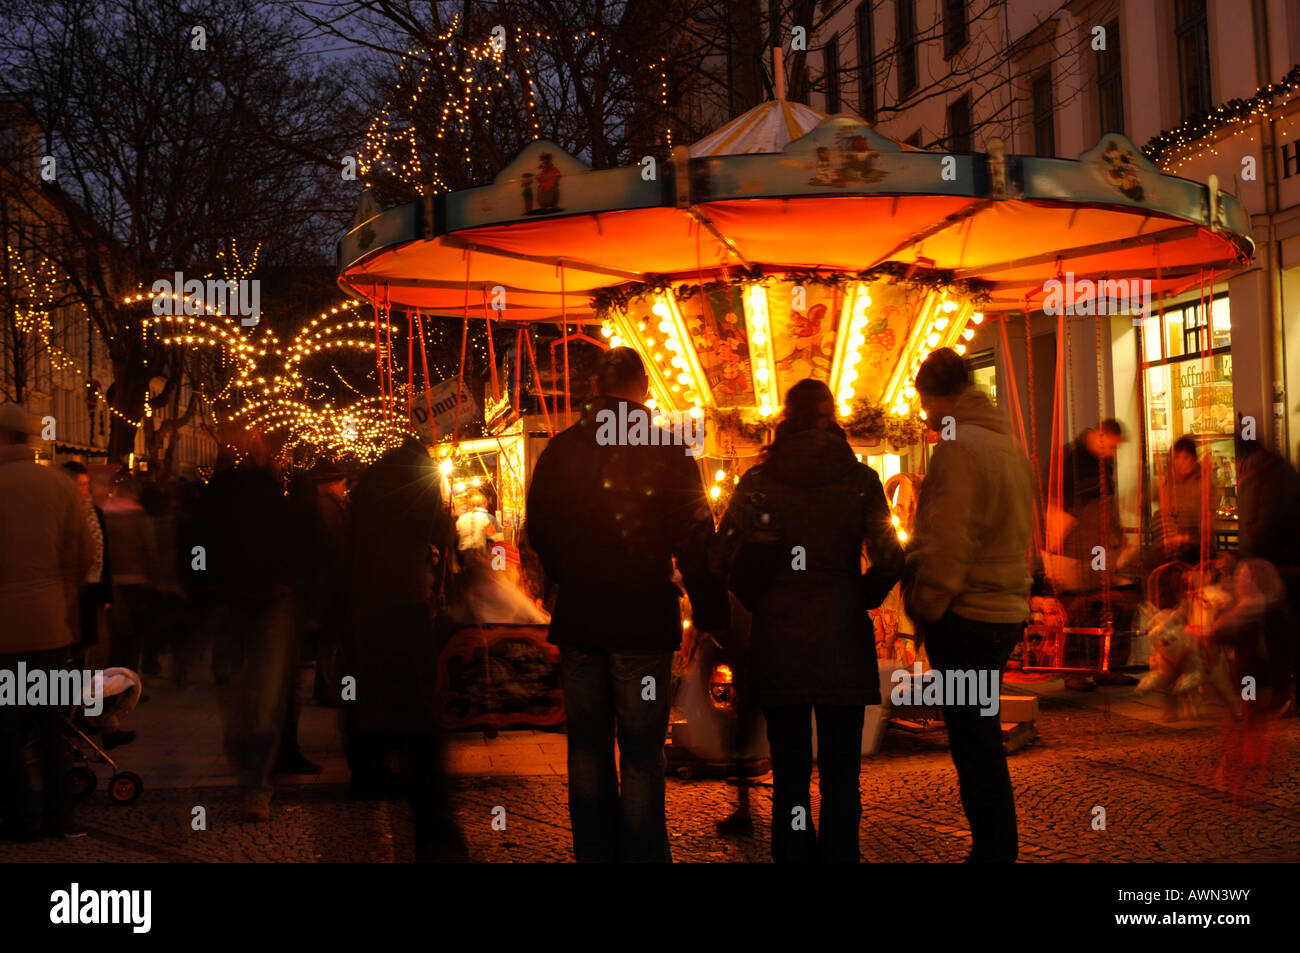 Swing carousel at the Christmas fair, Weimar, Thuringia, Germany, Europe Stock Photo